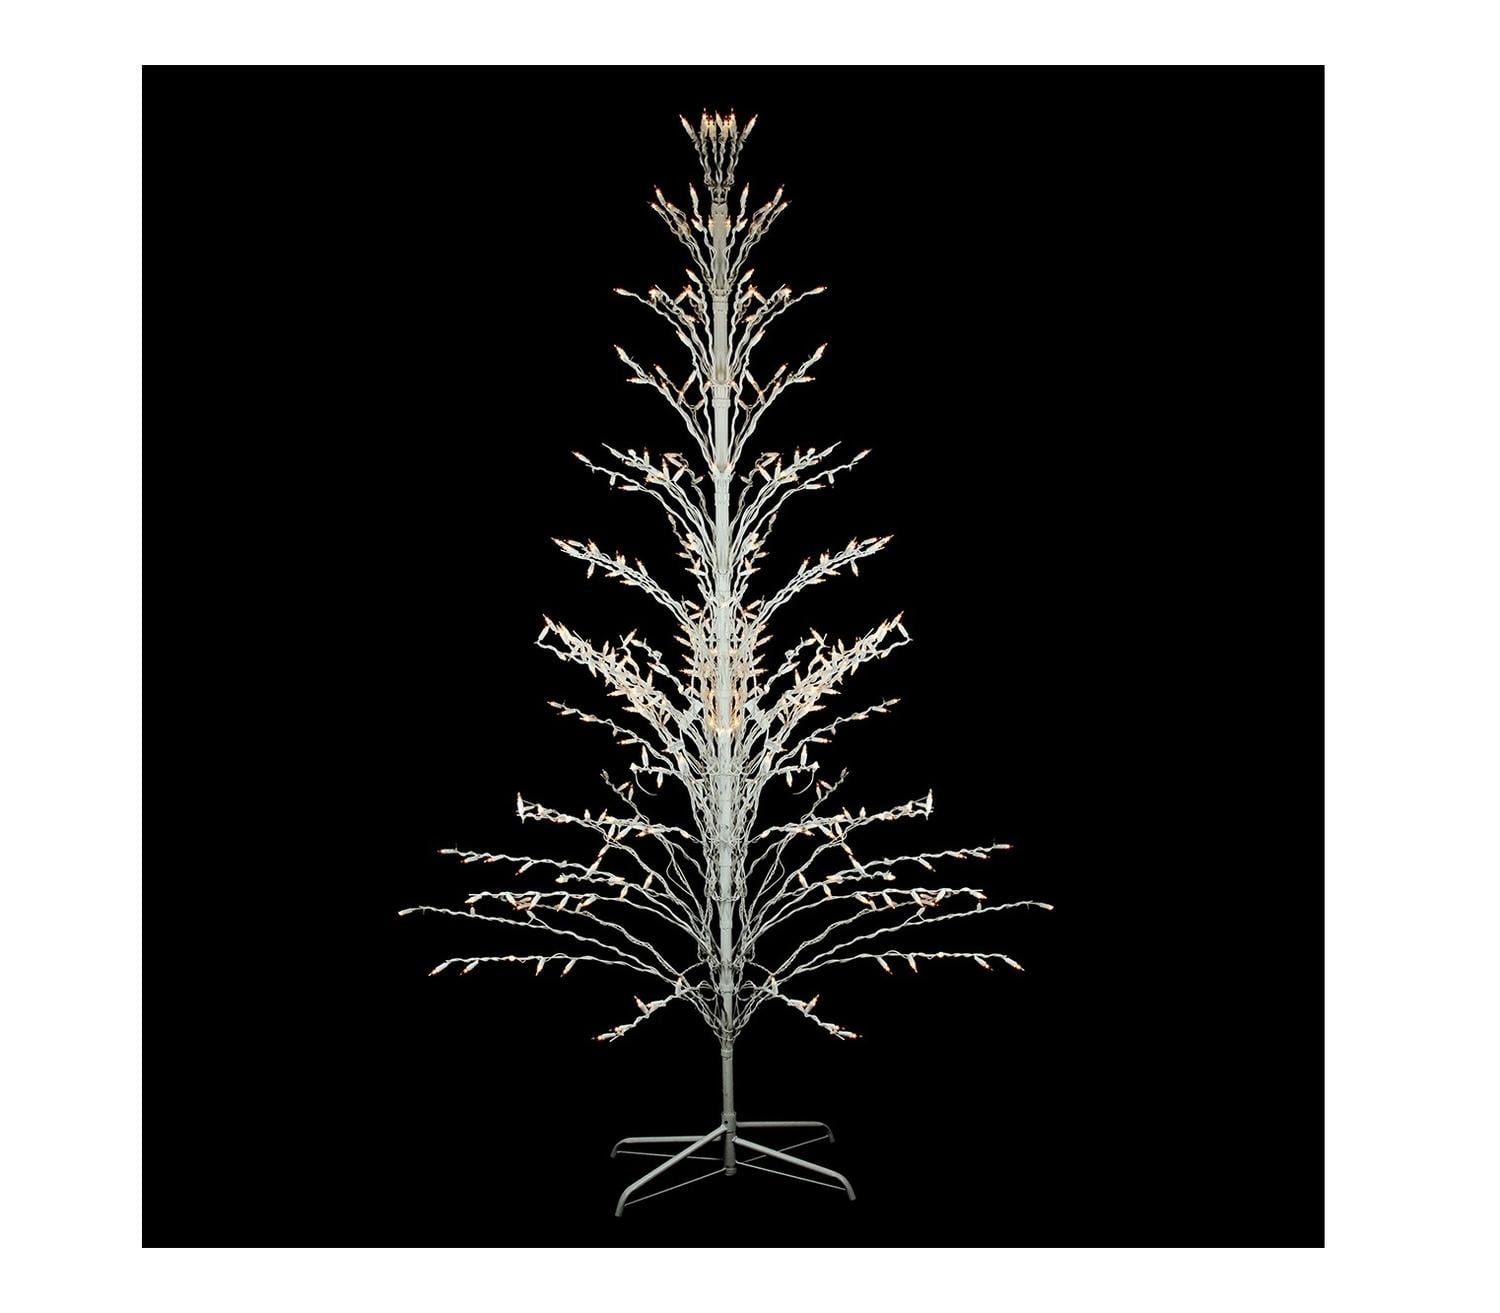 6' White Lighted Christmas Cascade Twig Tree Outdoor Yard Art ...